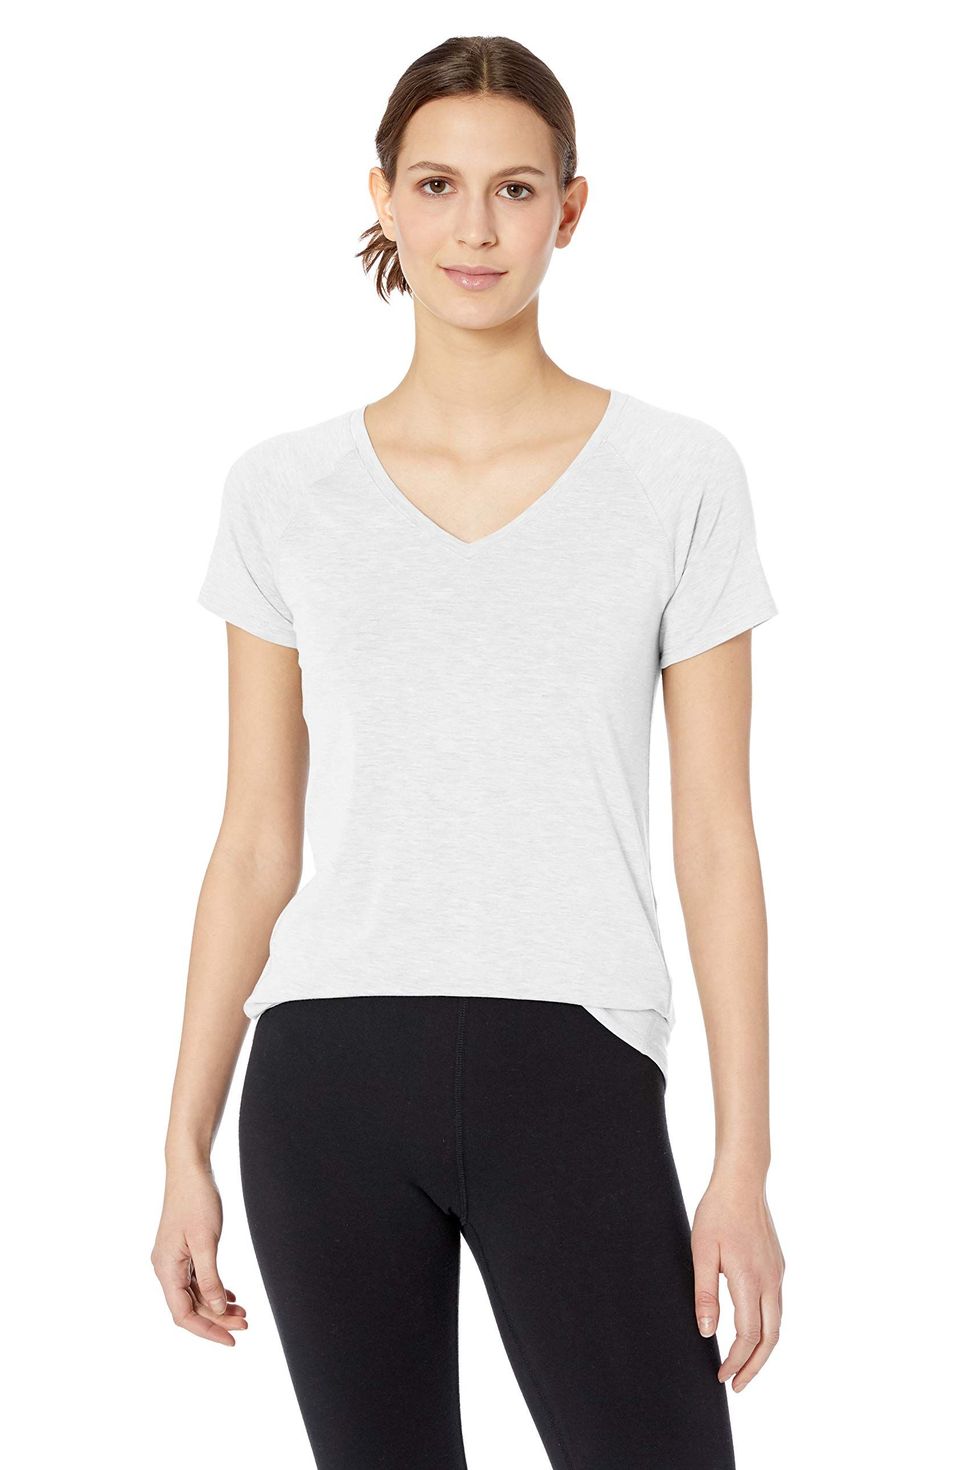 19 Best V-Neck T-Shirts For Women In 2023